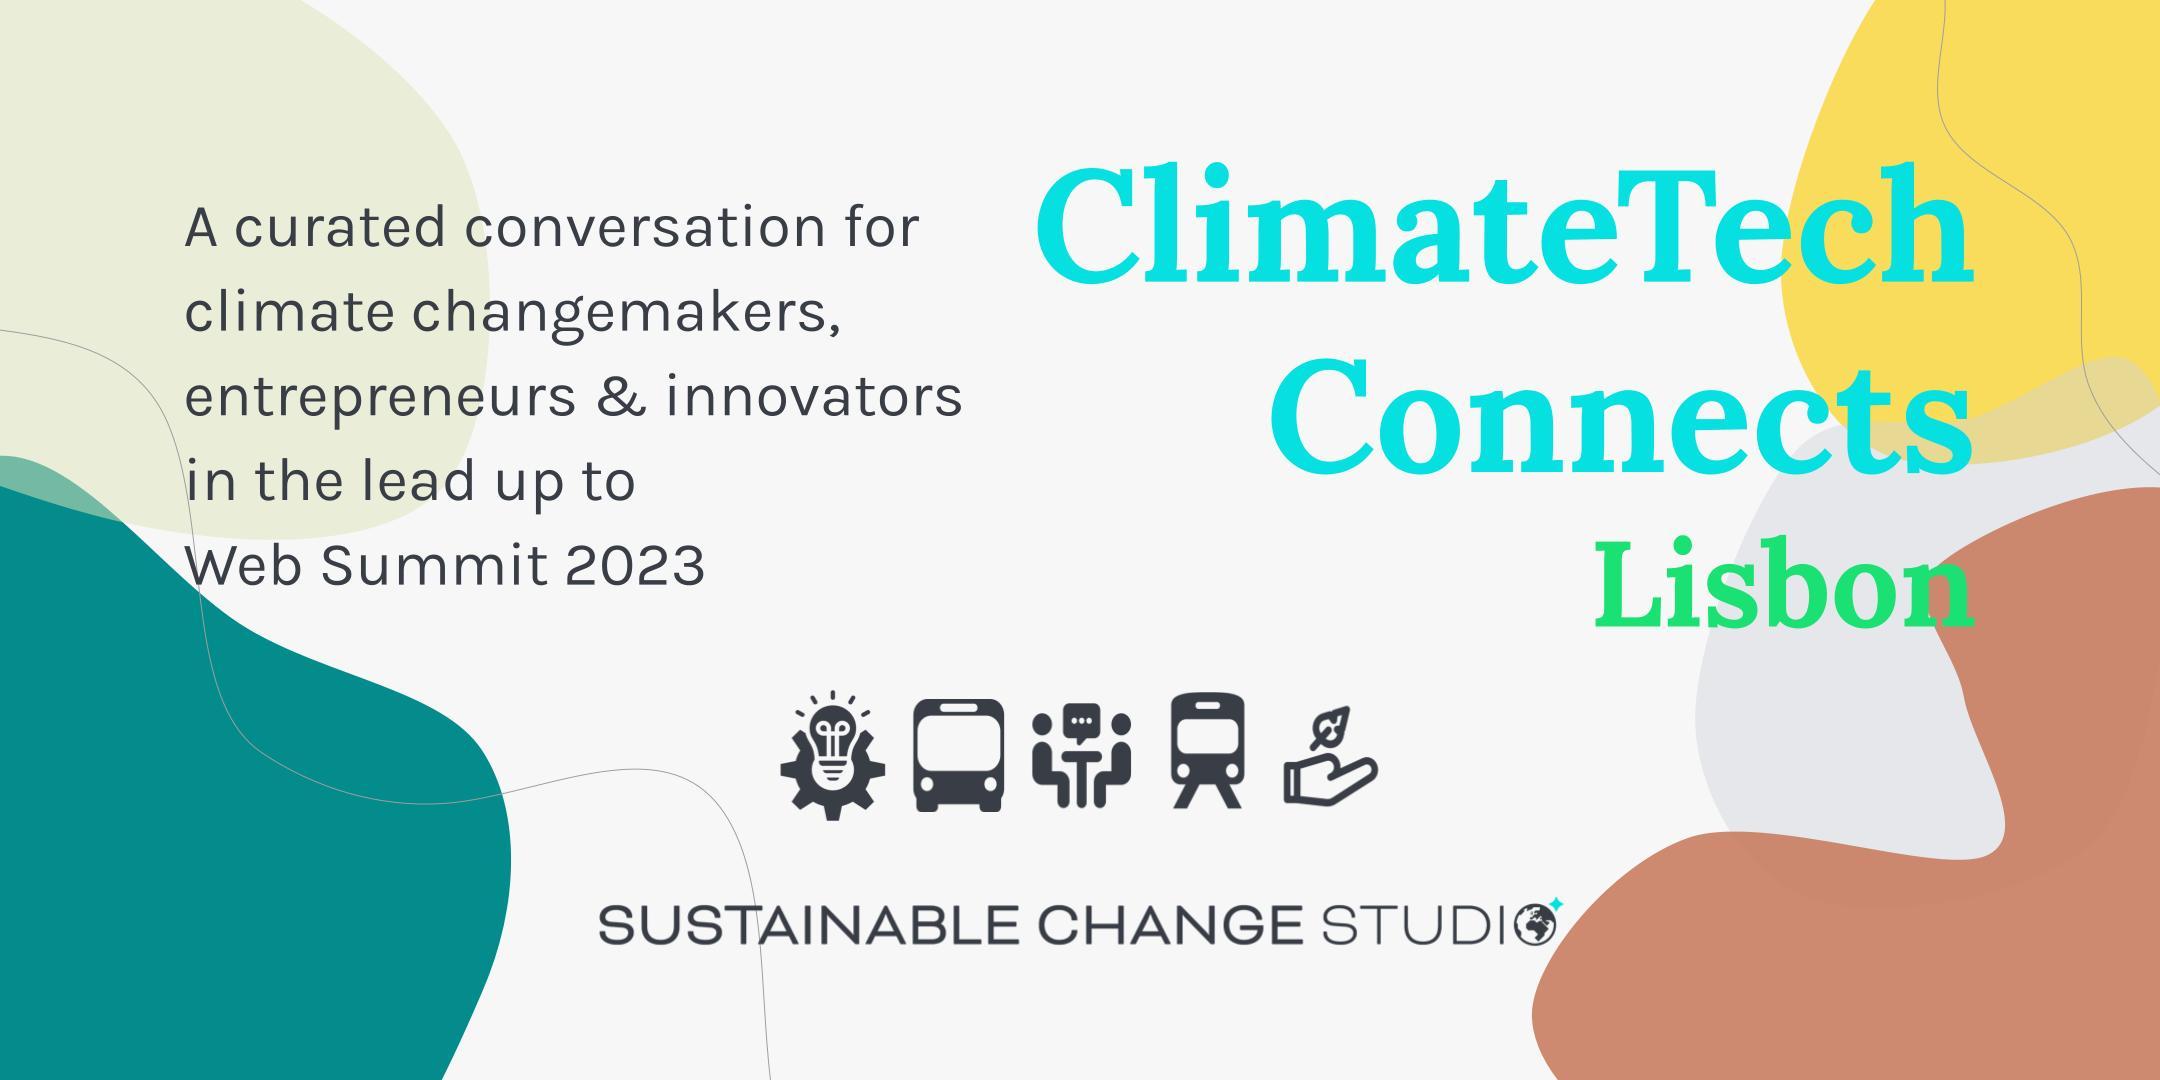 ClimateTech Connects: a conversational warm-up on Web Summit eve in Lisbon